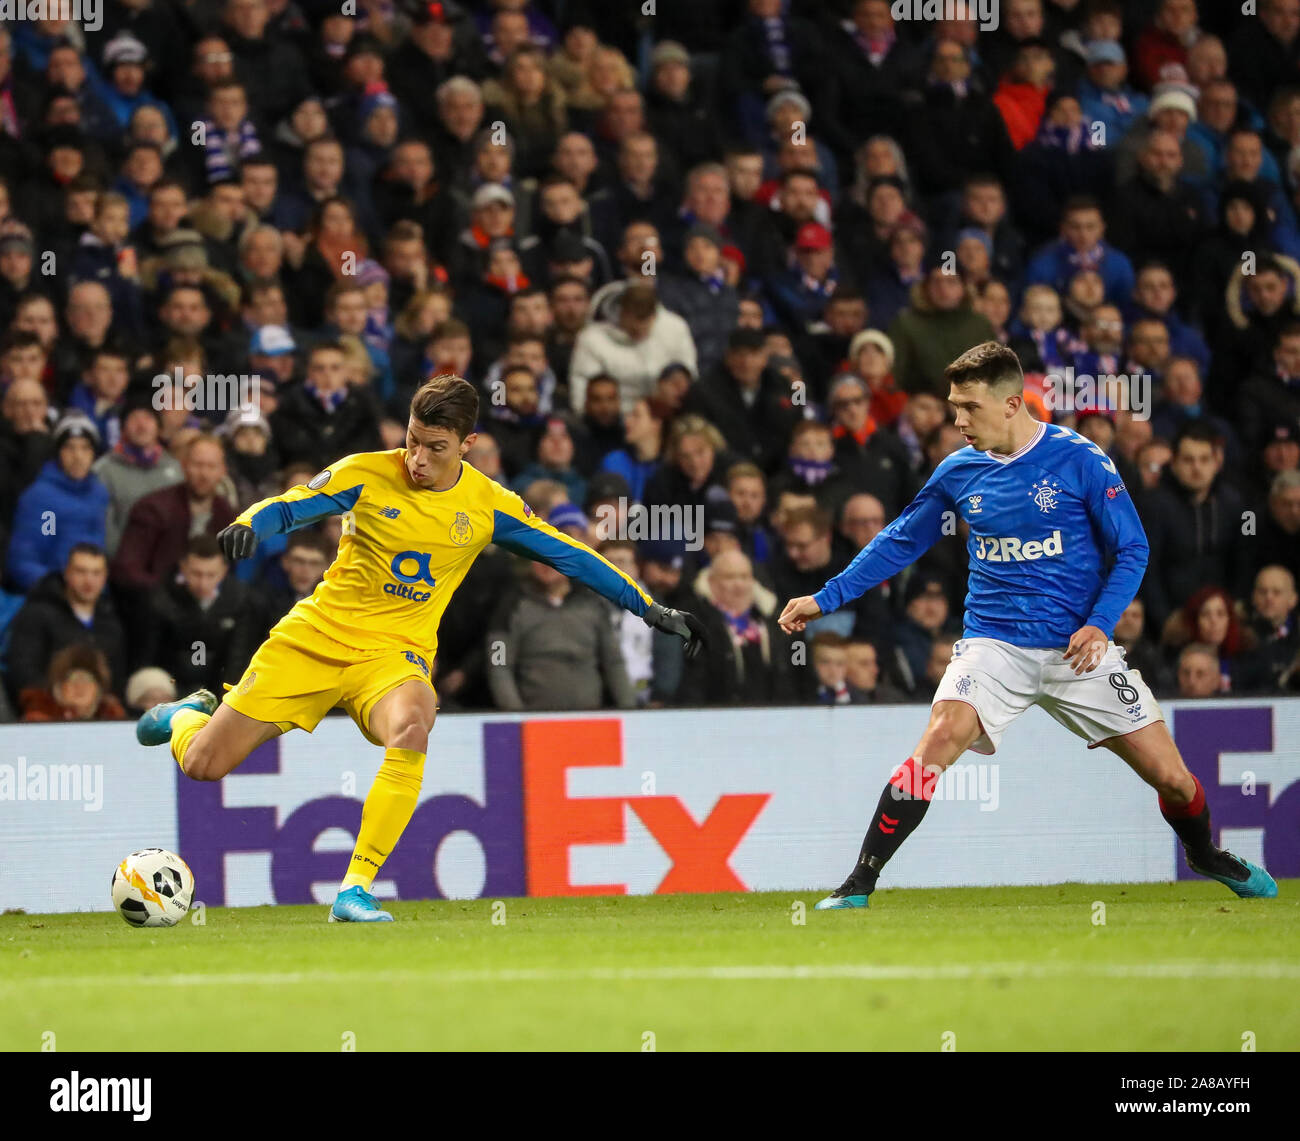 Glasgow, UK. 07th Nov, 2019. Glasgow Rangers played their fourth UEFA Europa League Group G fixture at their home ground, Ibrox Stadium, Glasgow against FC Porto from Portugal. This was the return match against Porto when the score was a draw at 1 -1 at Estádio do Dragão and this was an important game for both teams. Rangers won 2 -0. Credit: Findlay/Alamy Live News Stock Photo